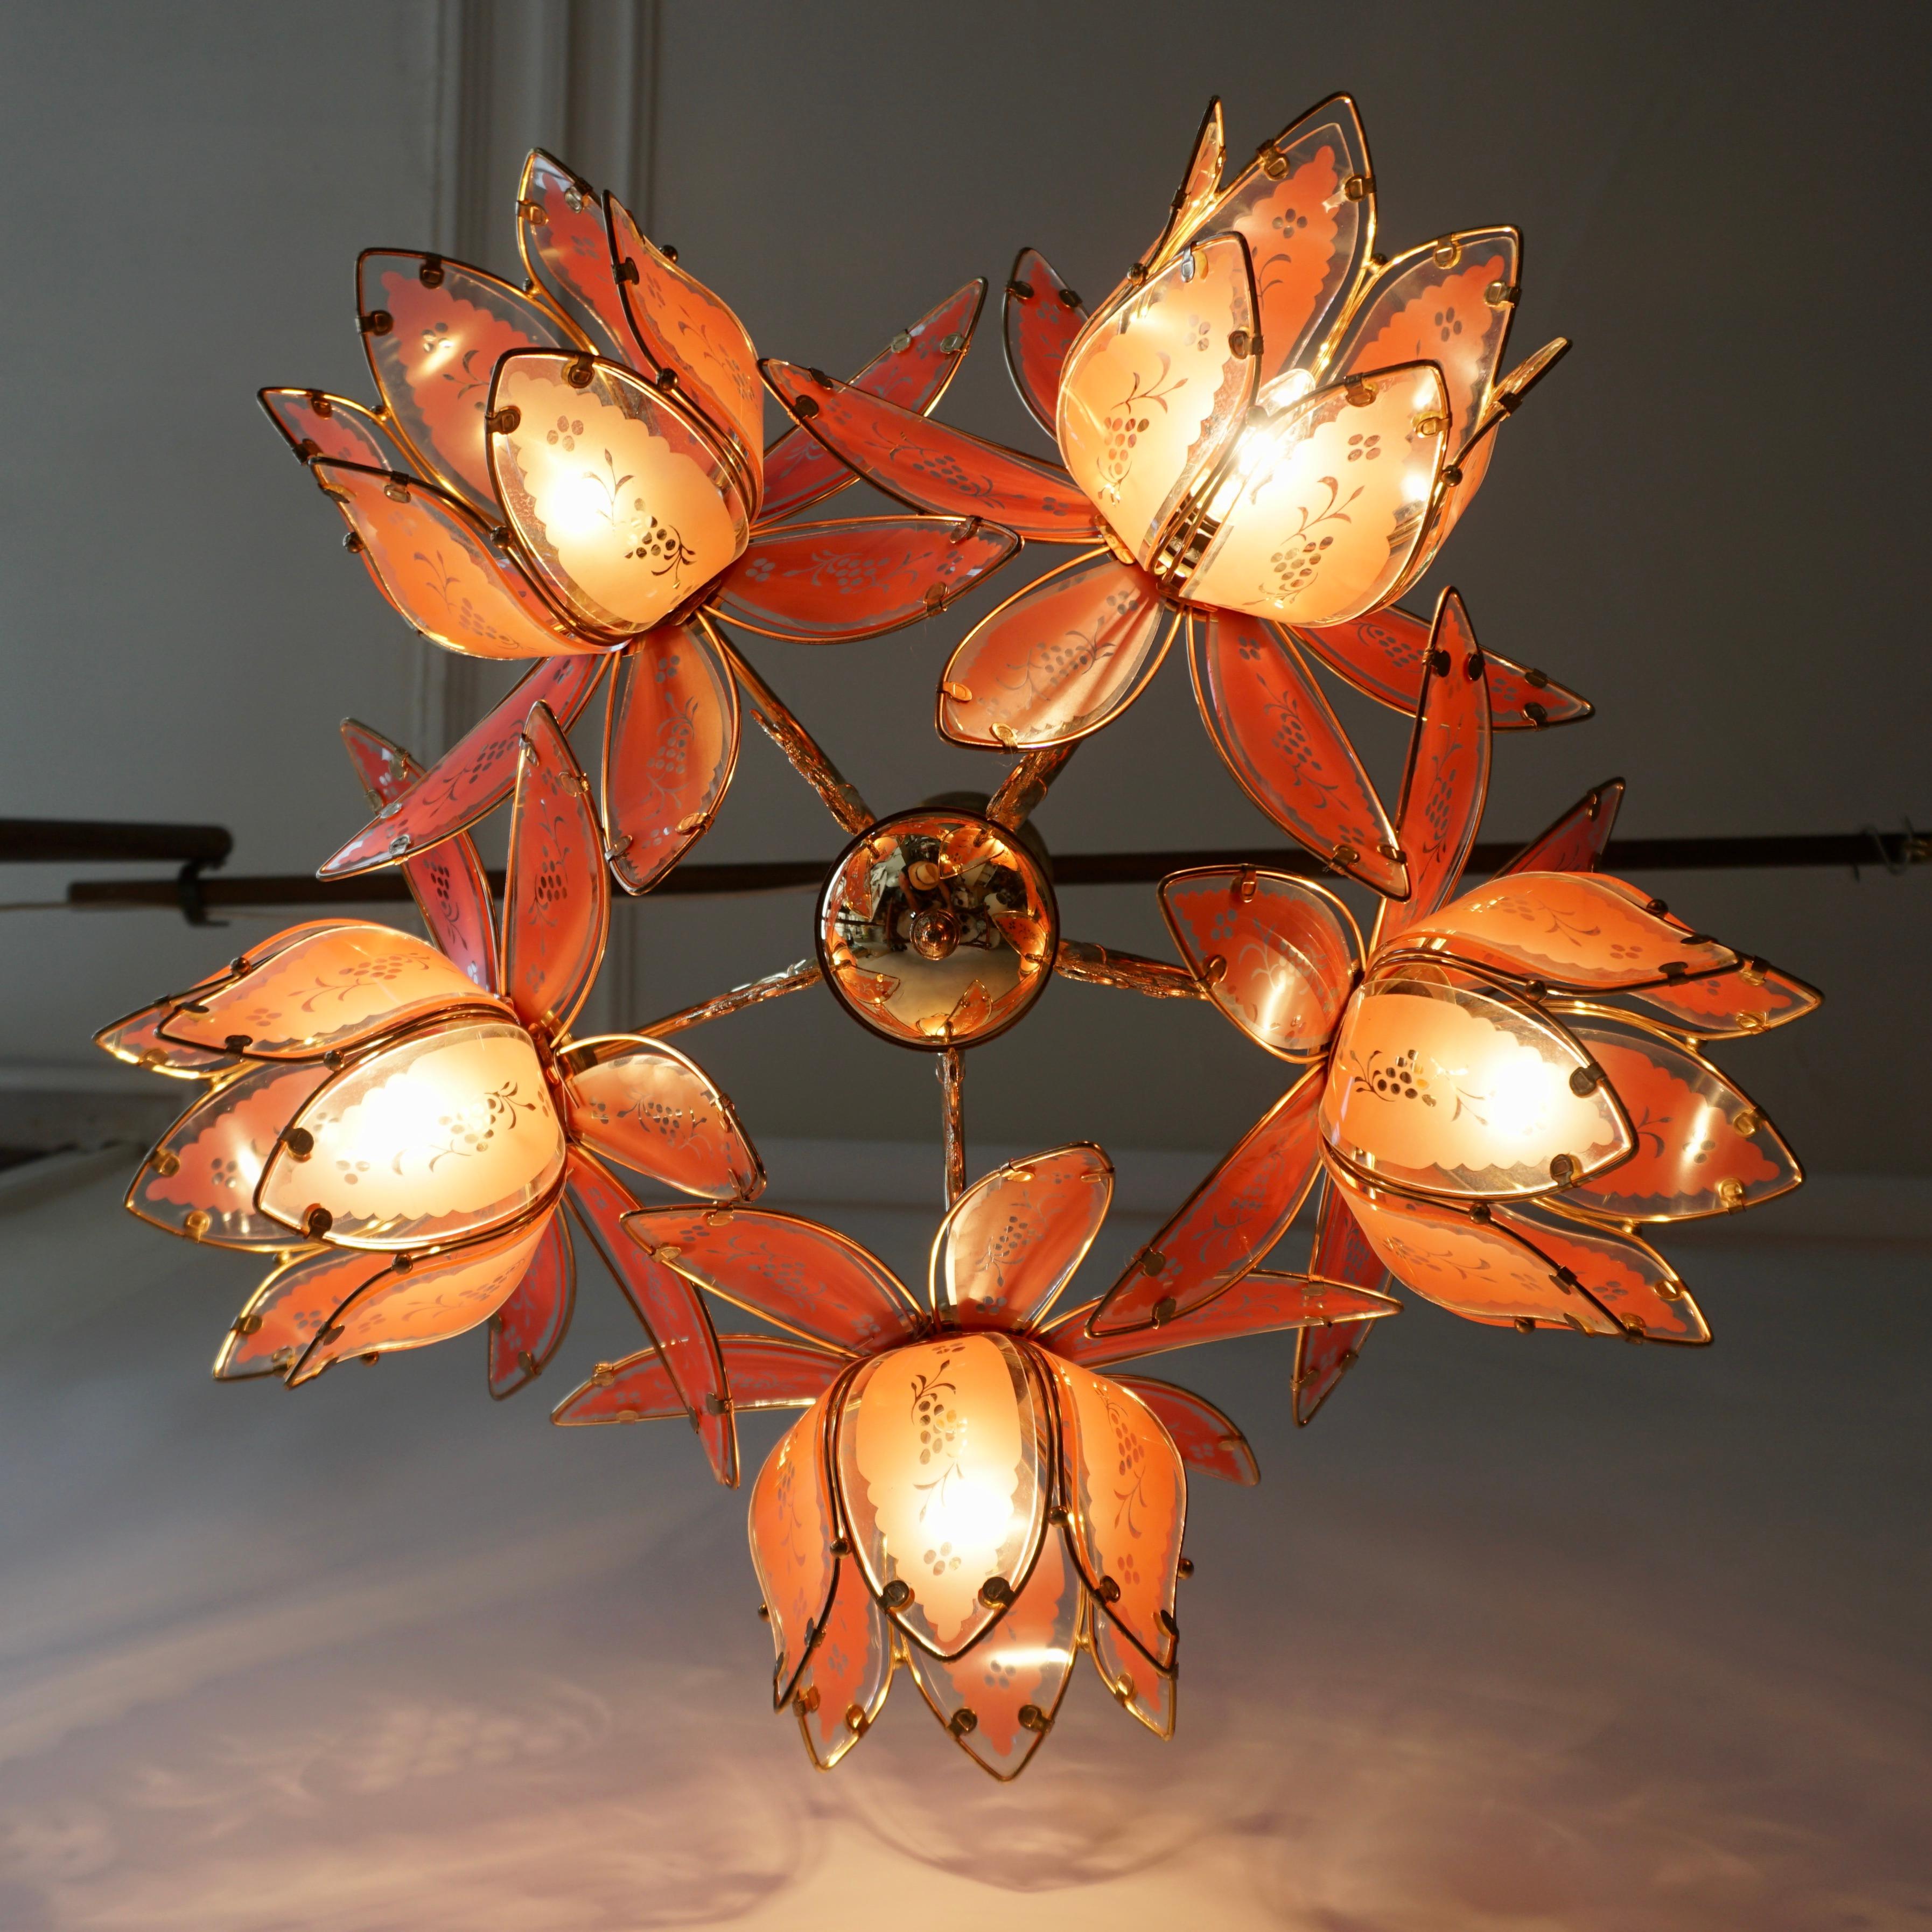 Italian chandelier in brass with five Murano glass flowers.The light created by this chandelier is very pleasant and ambient
The light requires five single E27 screw fit lightbulbs (60Watt max.) LED compatible.

Measures: Diameter 26.7 inch, 68